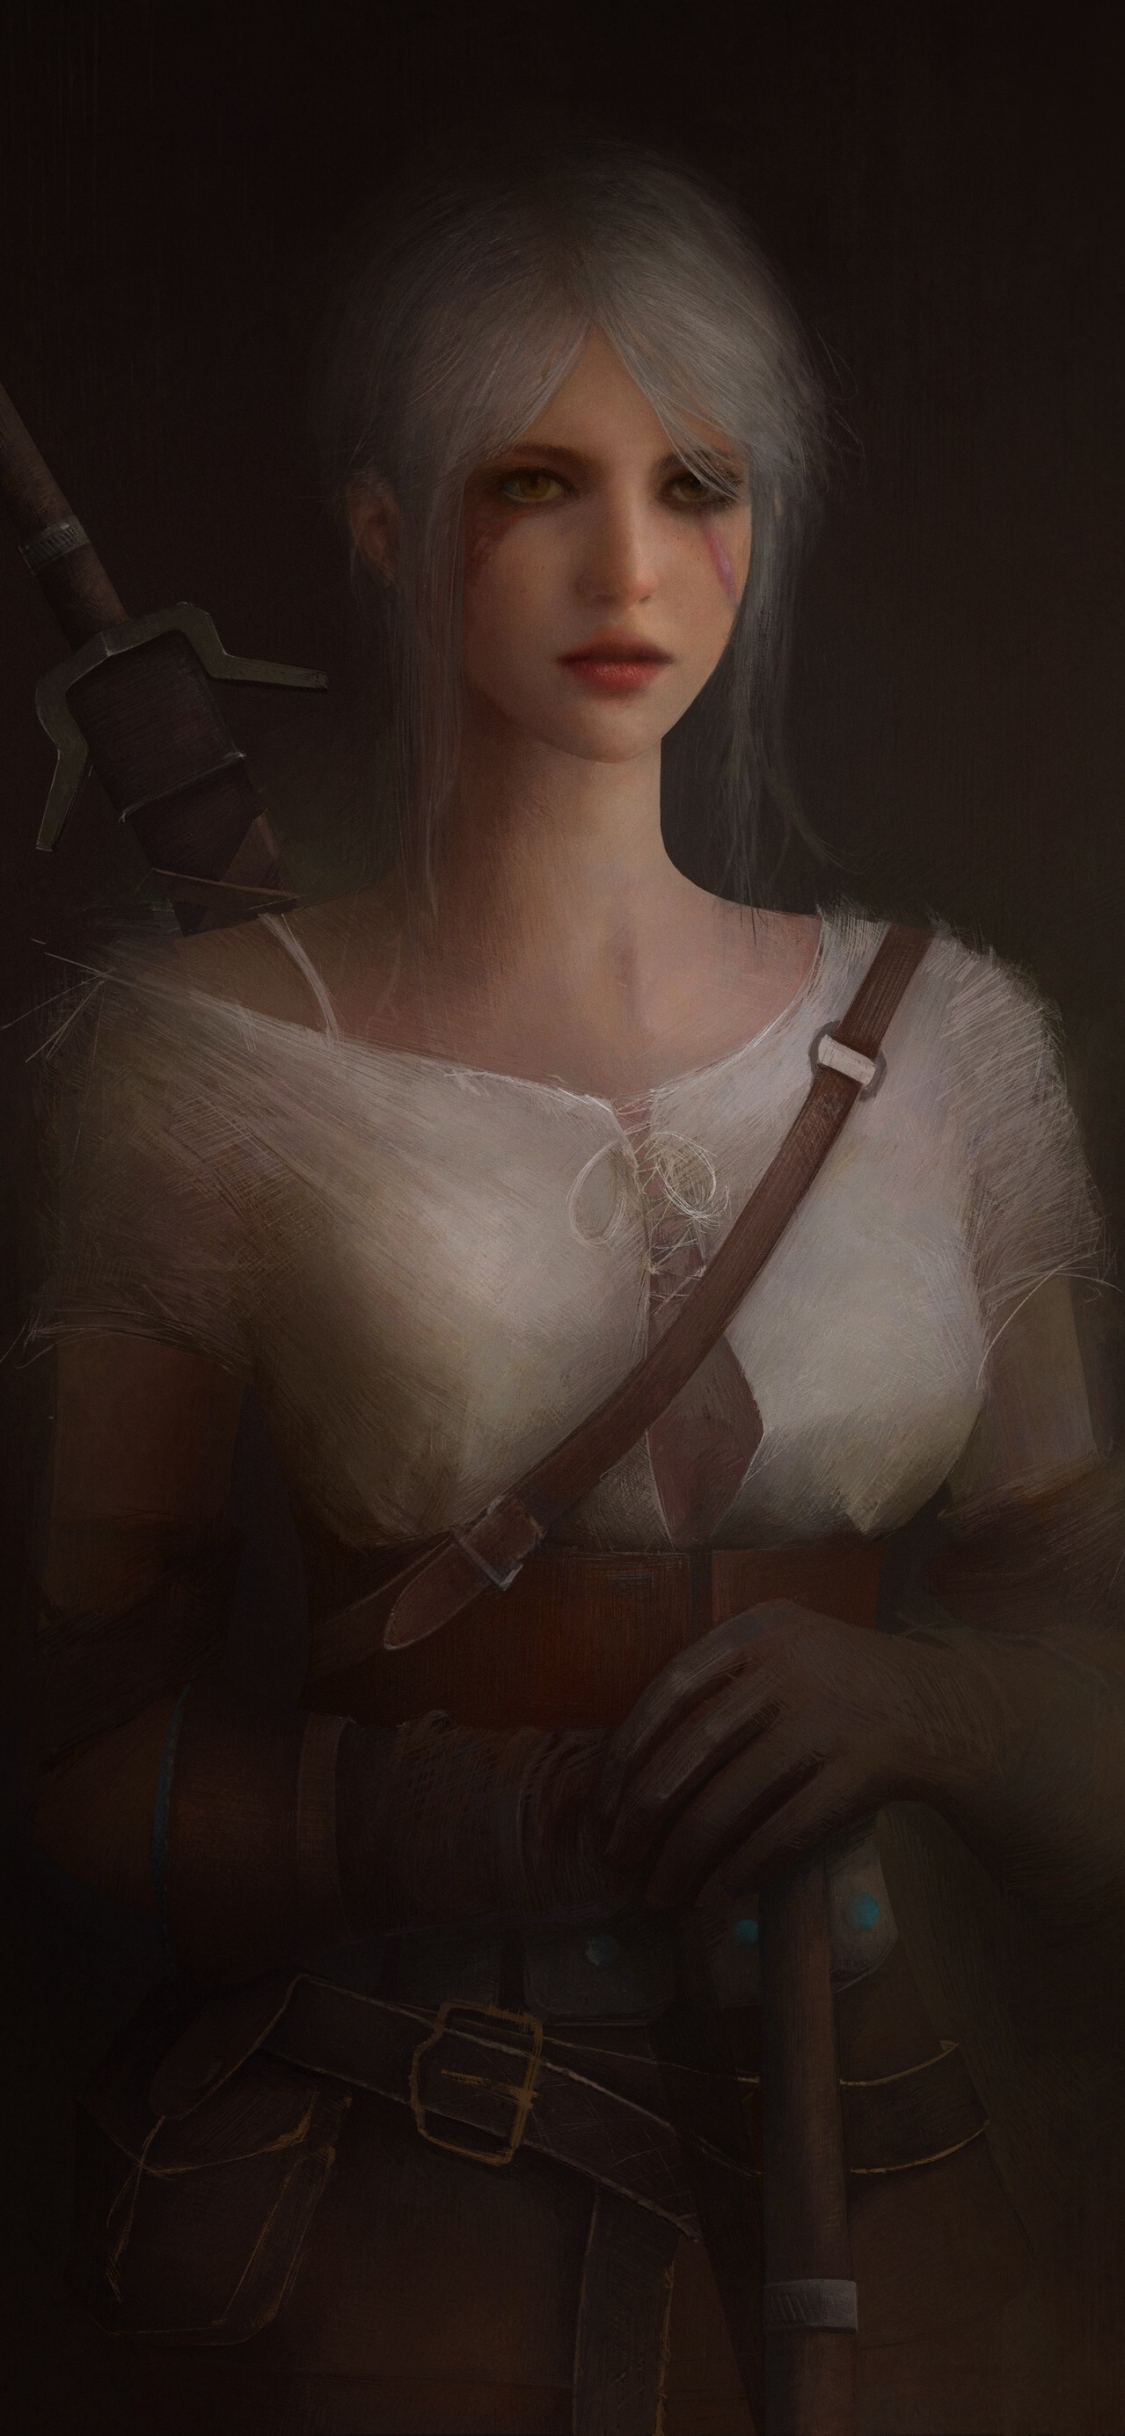 The Witcher 3: Wild Hunt Phone Wallpaper by ARIES s